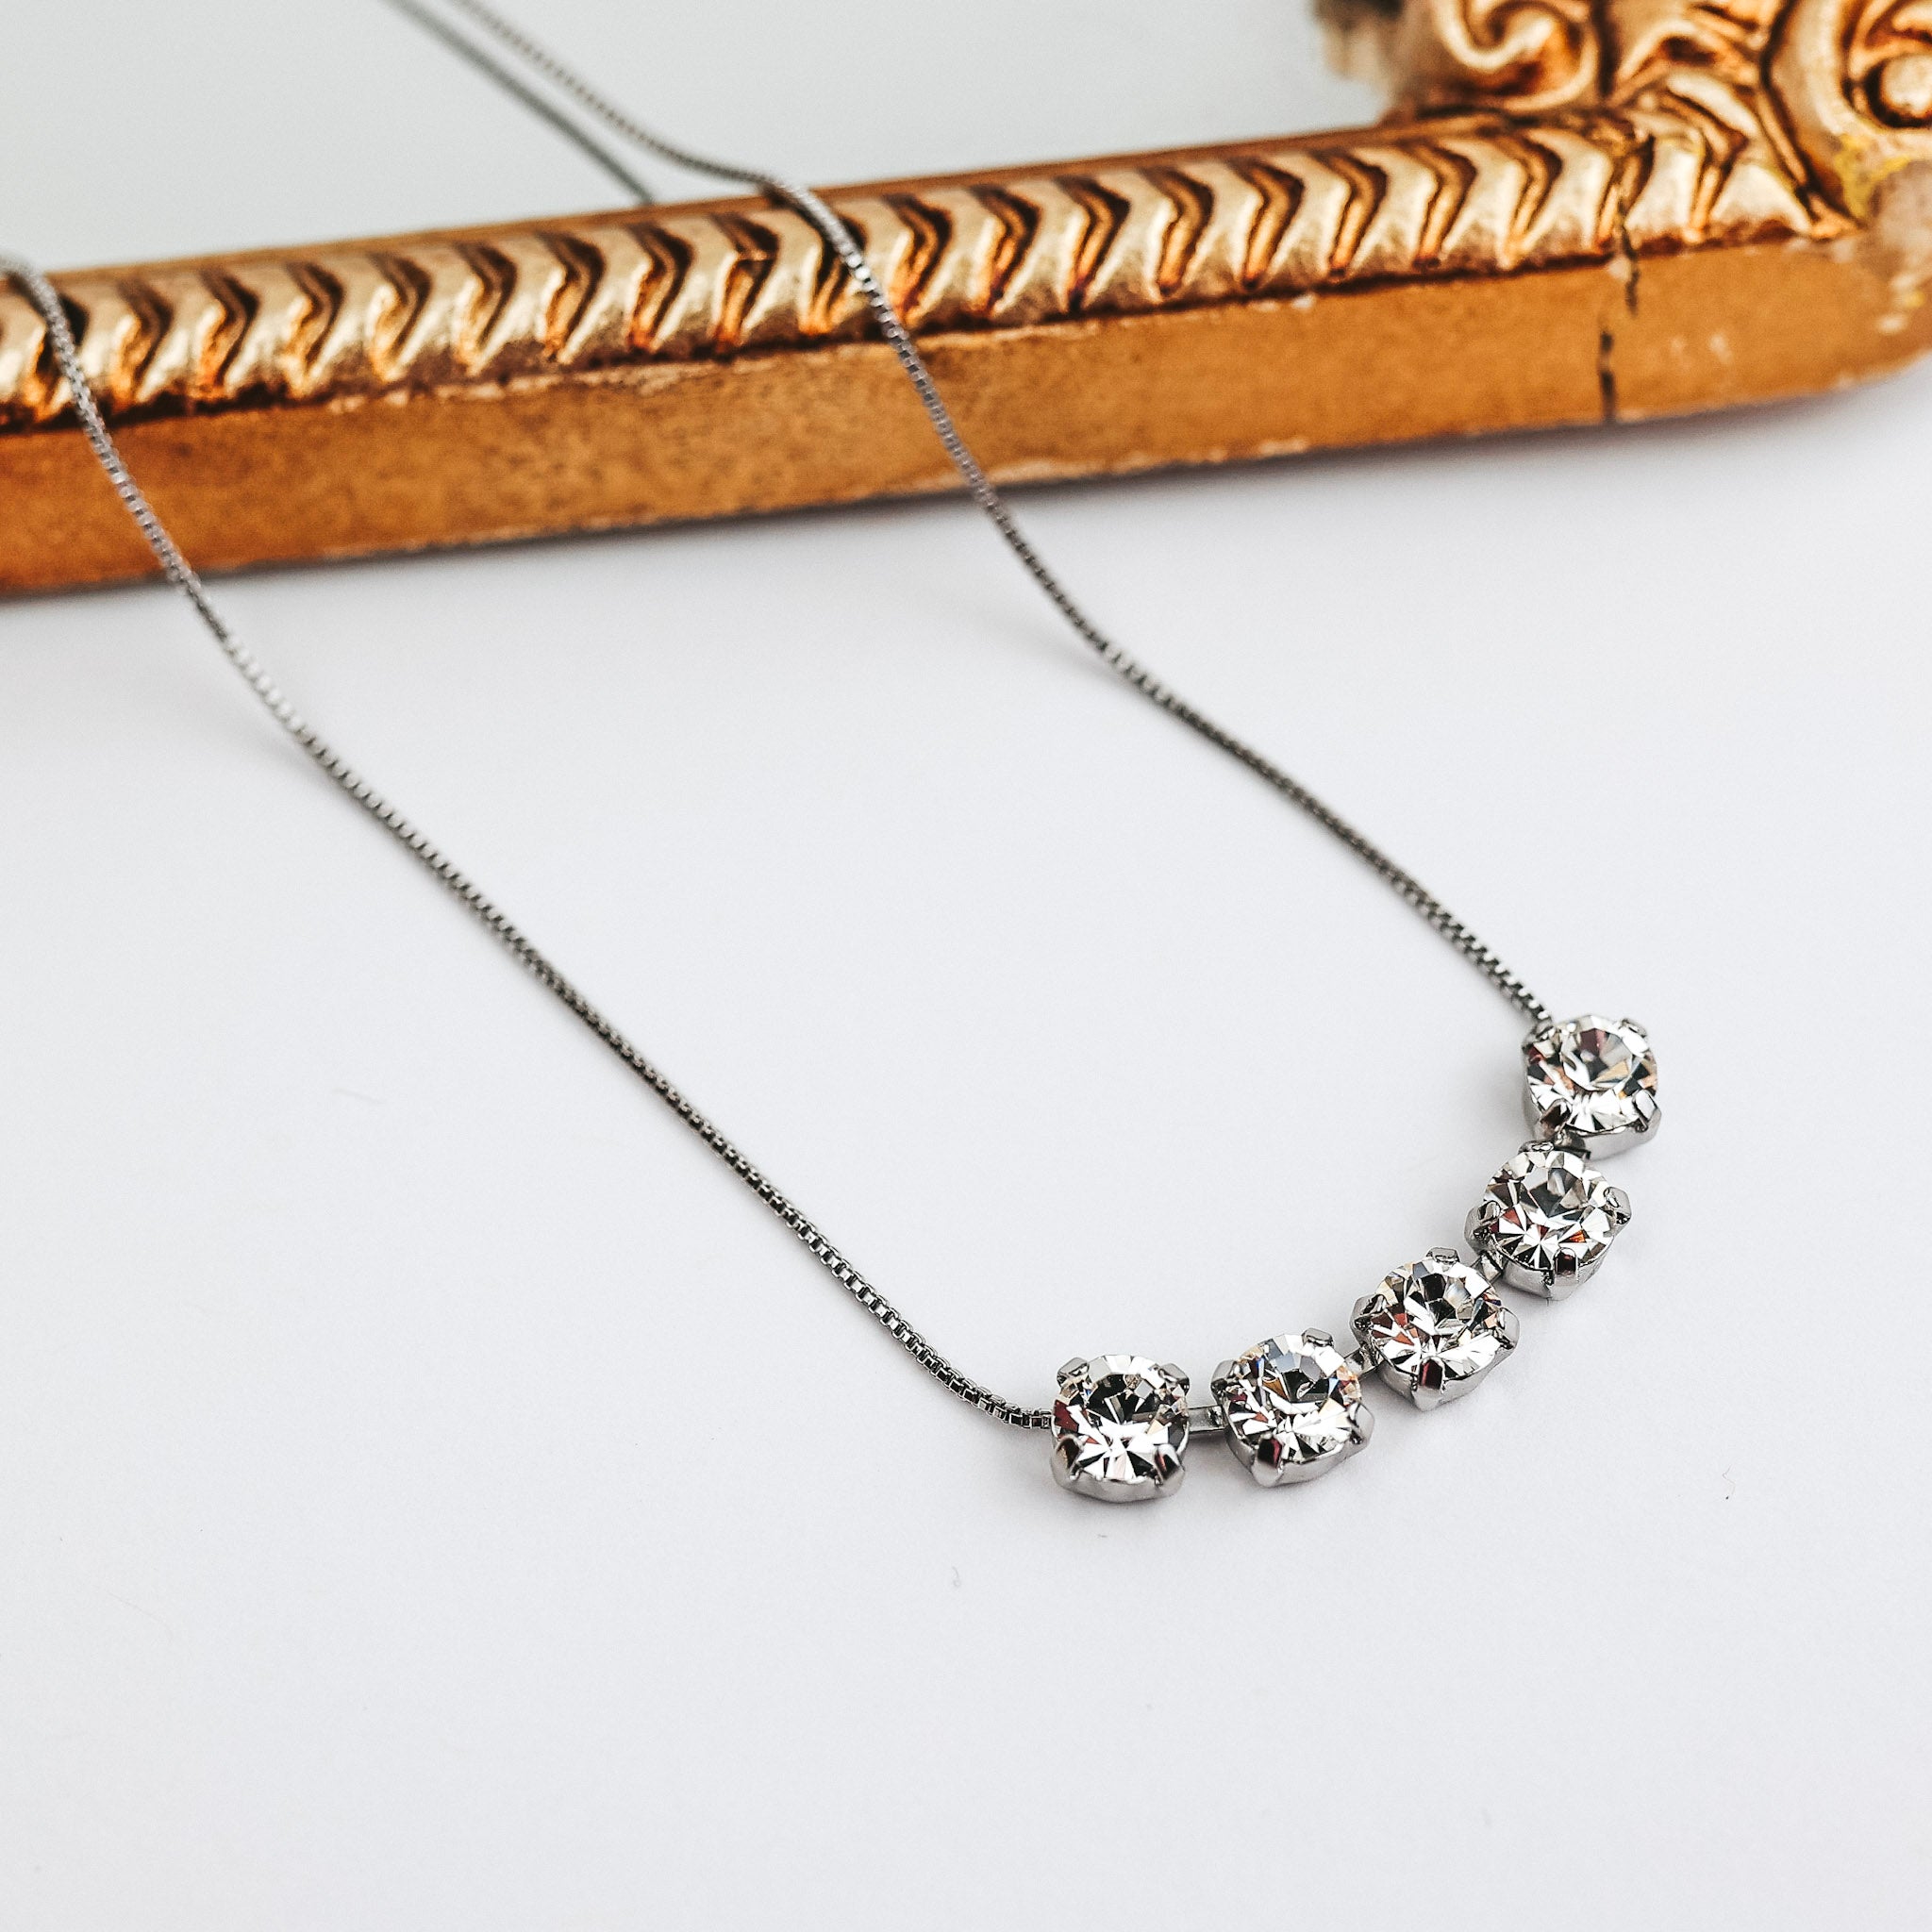 A silver tone necklace with five clear crystals at the front. This necklace is pictured on a white background with a mirror.